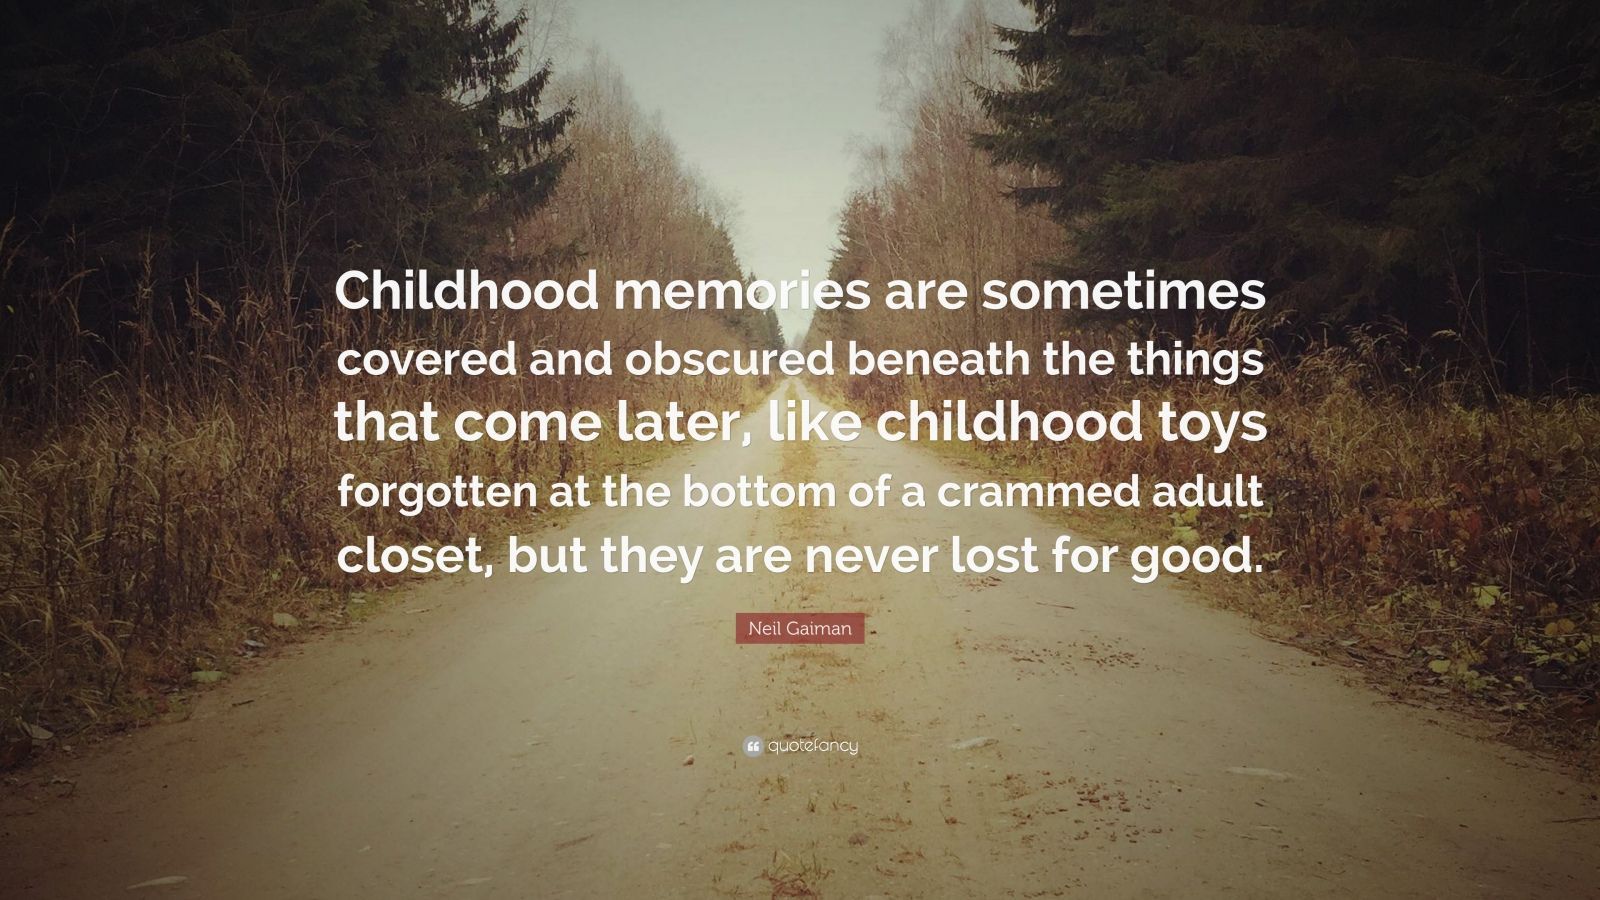 Neil Gaiman Quote: “Childhood memories are sometimes covered and obscured beneath the things that come later, like childhood toys forgotten .”